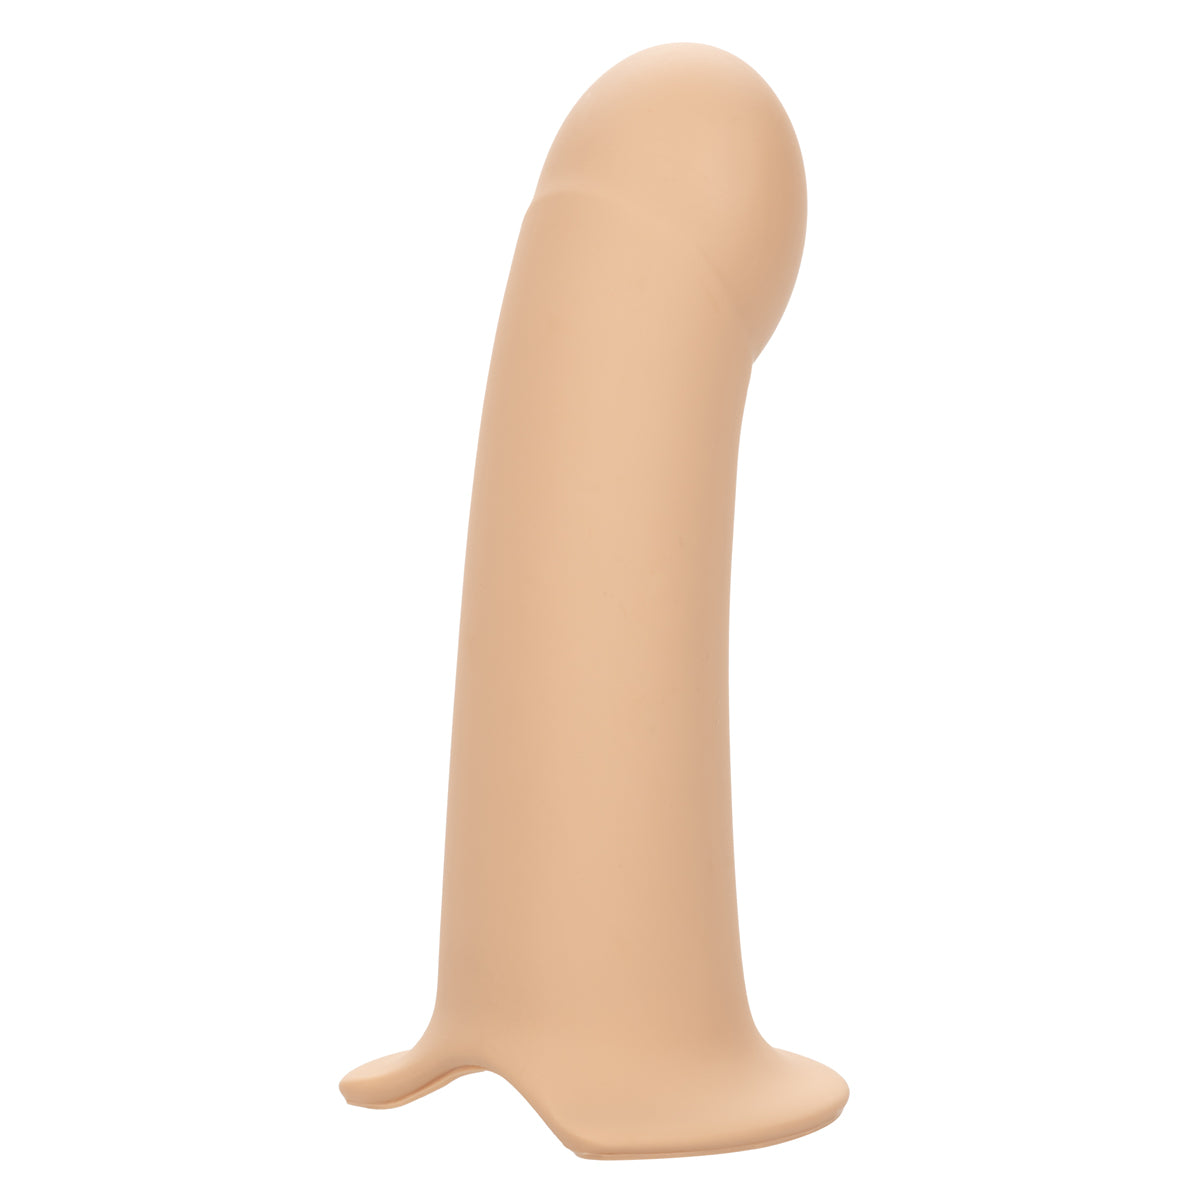 CalExotics® - Performance Maxx™ - Penis Extension With Harness – Ivory